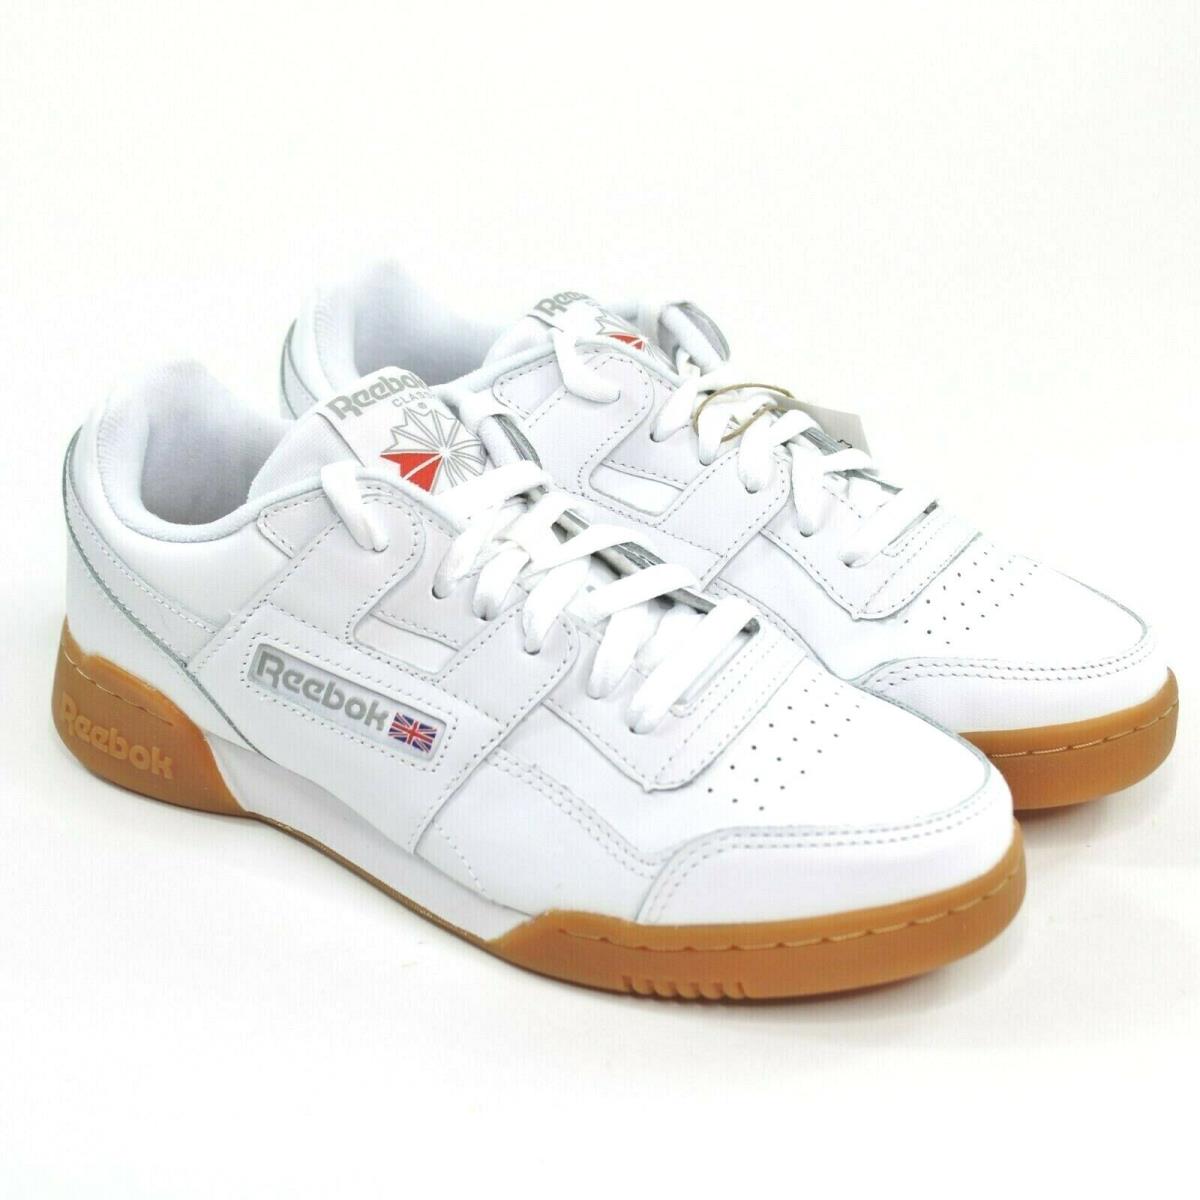 Reebok Mens Workout Plus Cross Trainer Shoes w/ Tags White Various Sizes